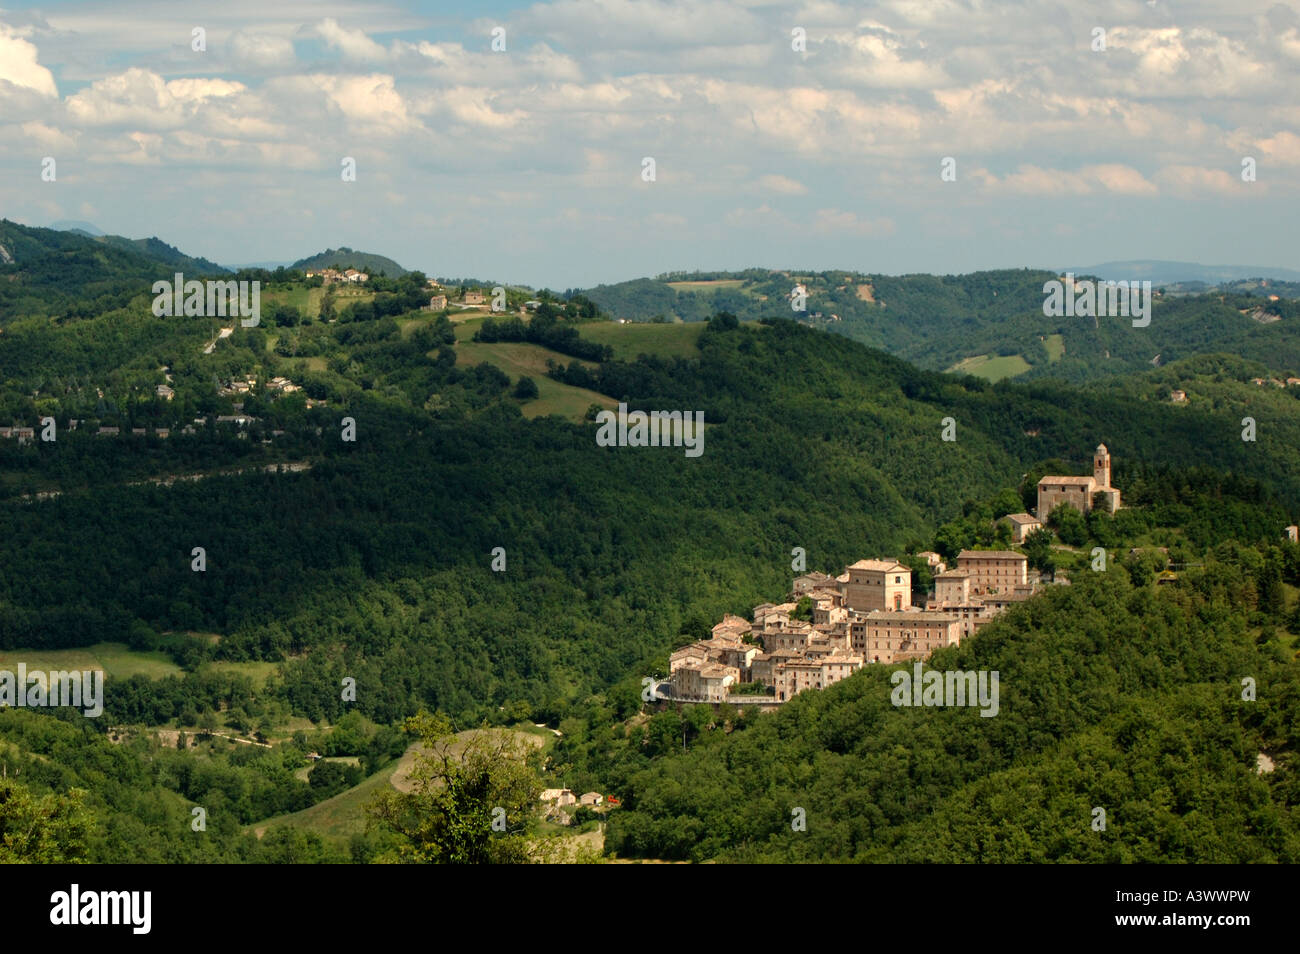 Monti Fortino A typical medieval hill town of Le Marche Italy Stock Photo